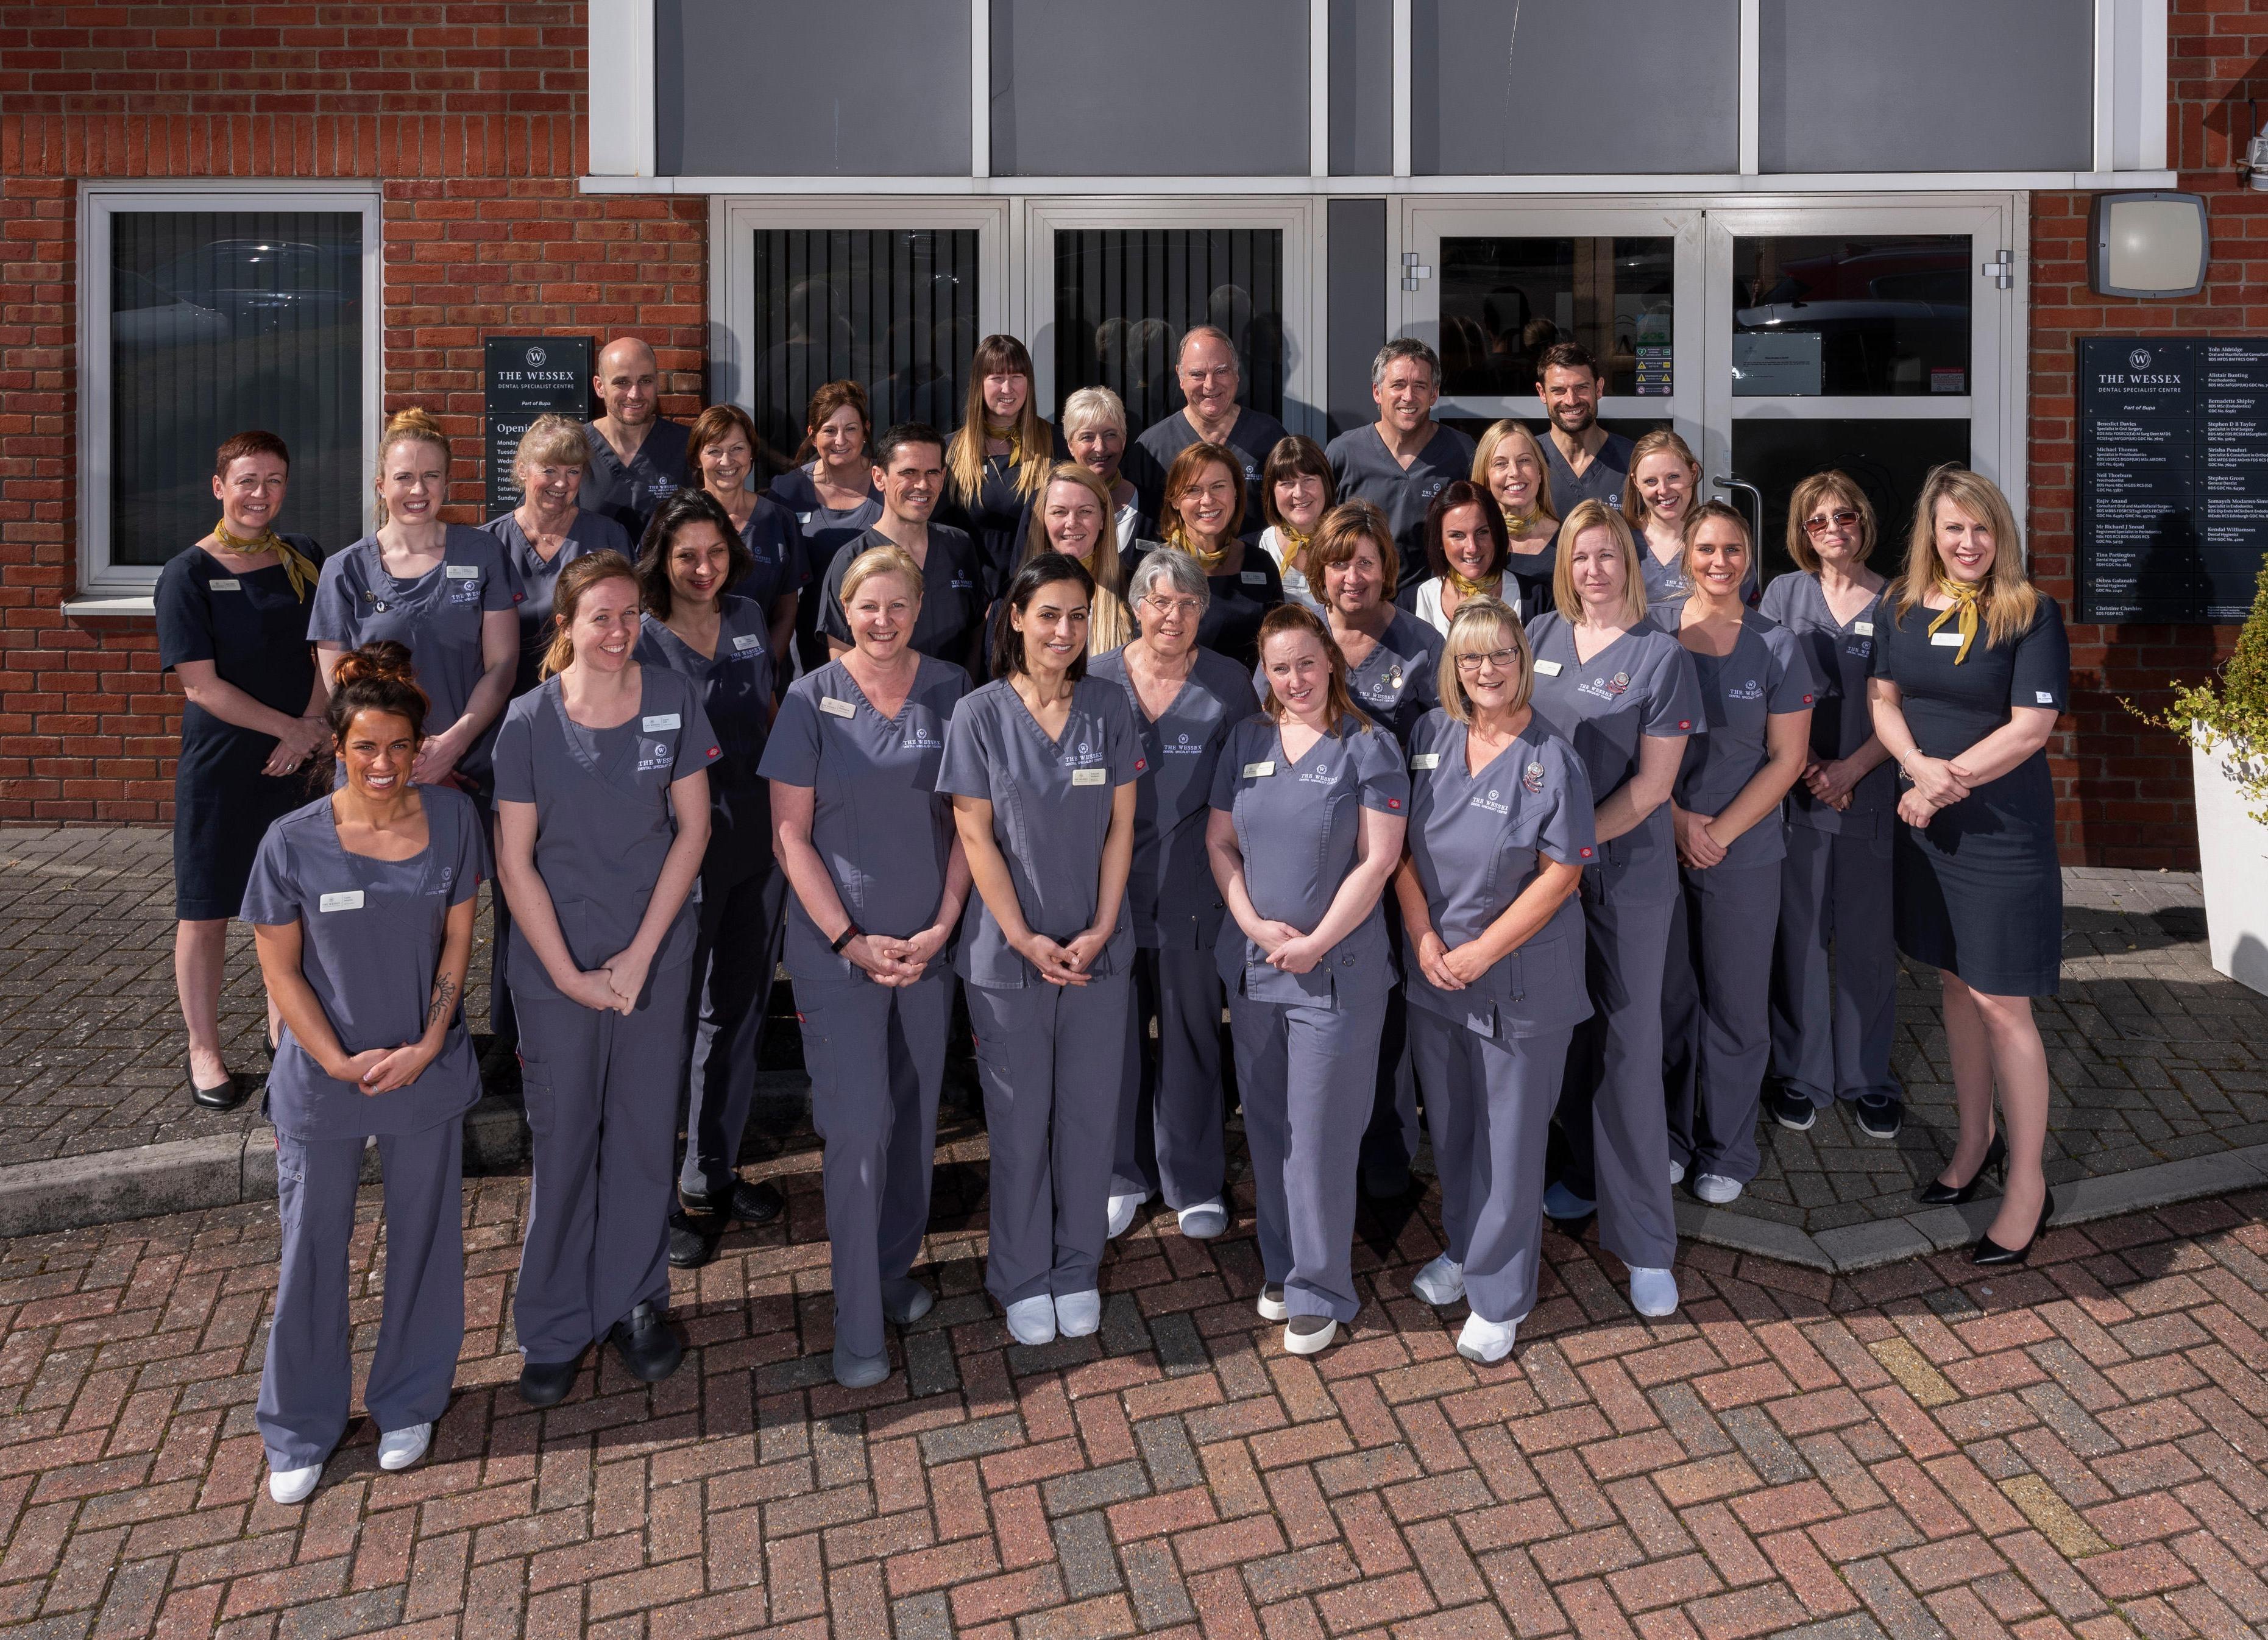 Meet the team at The Wessex Dental Specialist Centre The Wessex Dental Specialist Centre Fareham 01329 226470